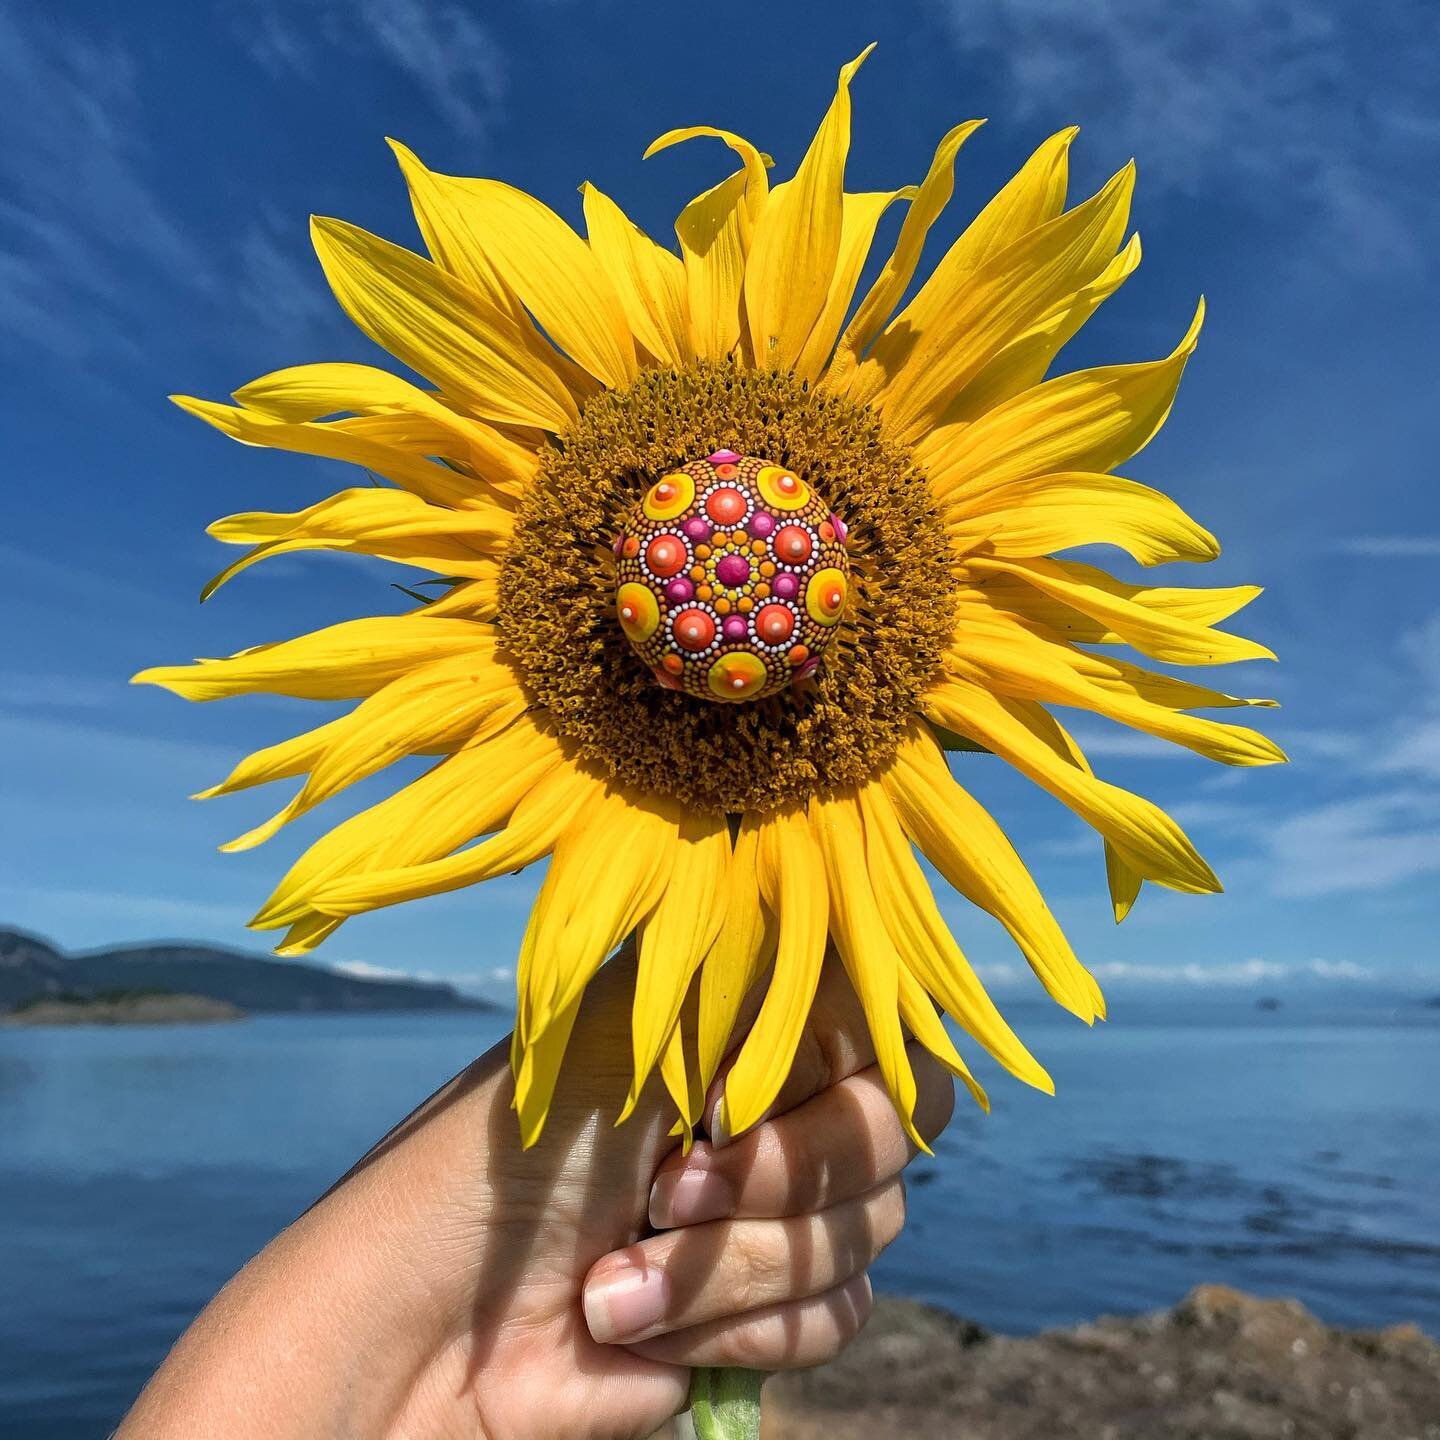 We&rsquo;re grew this 🌻 and I painted this stone! Together they&rsquo;re very happy! 
.
Anyone else do lots of gardening this strange year? What did you grow?
.
Mandala stone update- October 3 @ 4pm Vancouver time 💫